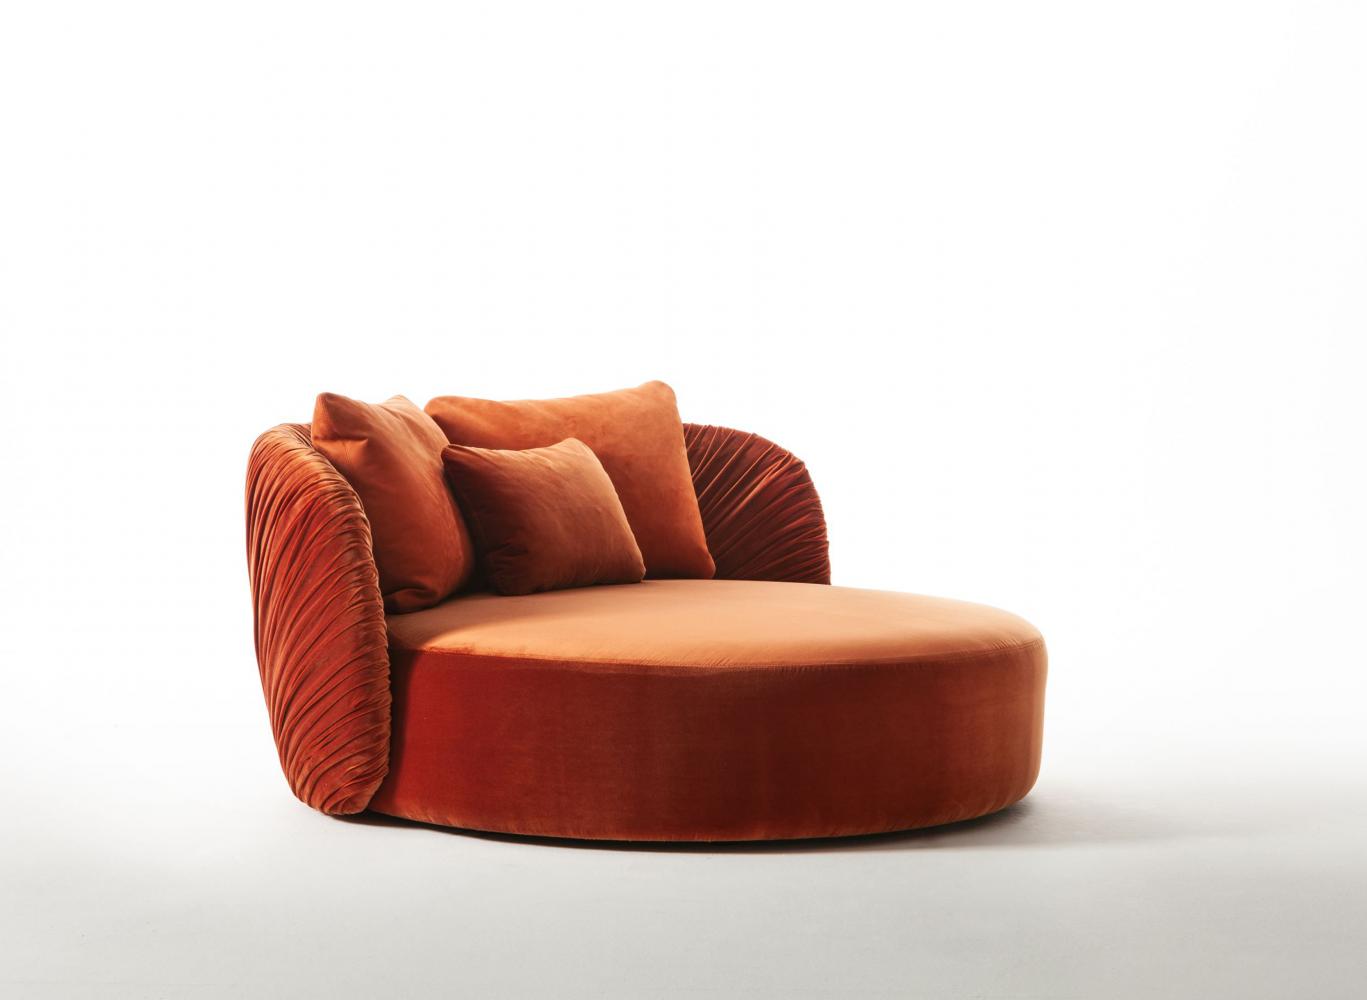 Laurameroni high-end luxury furniture for an exclusive orange colour palette inspiration